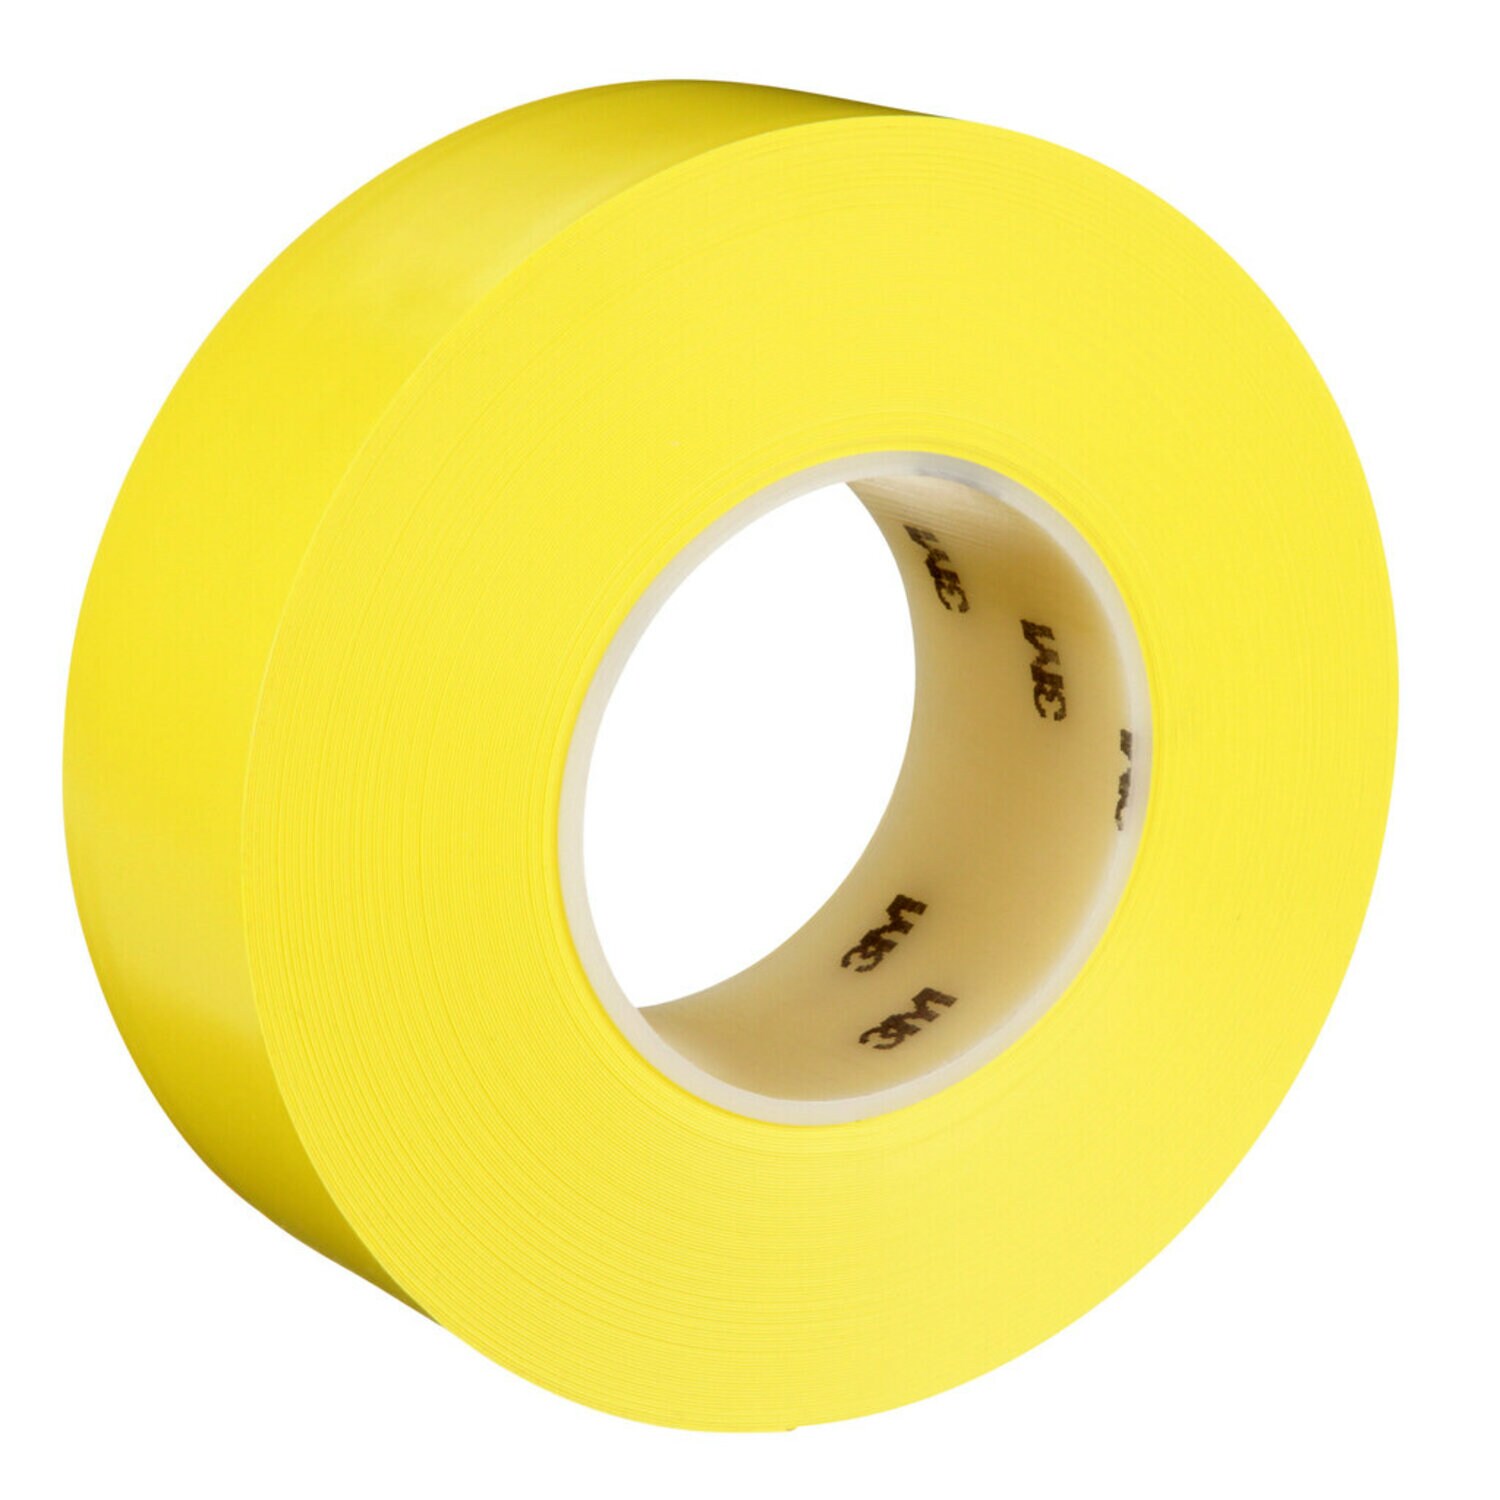 7100249185 - 3M Durable Floor Marking Tape 971, Yellow, 2 in x 36 yd, 17 mil, 6 Rolls/Case, Individually Wrapped Conveniently Packaged